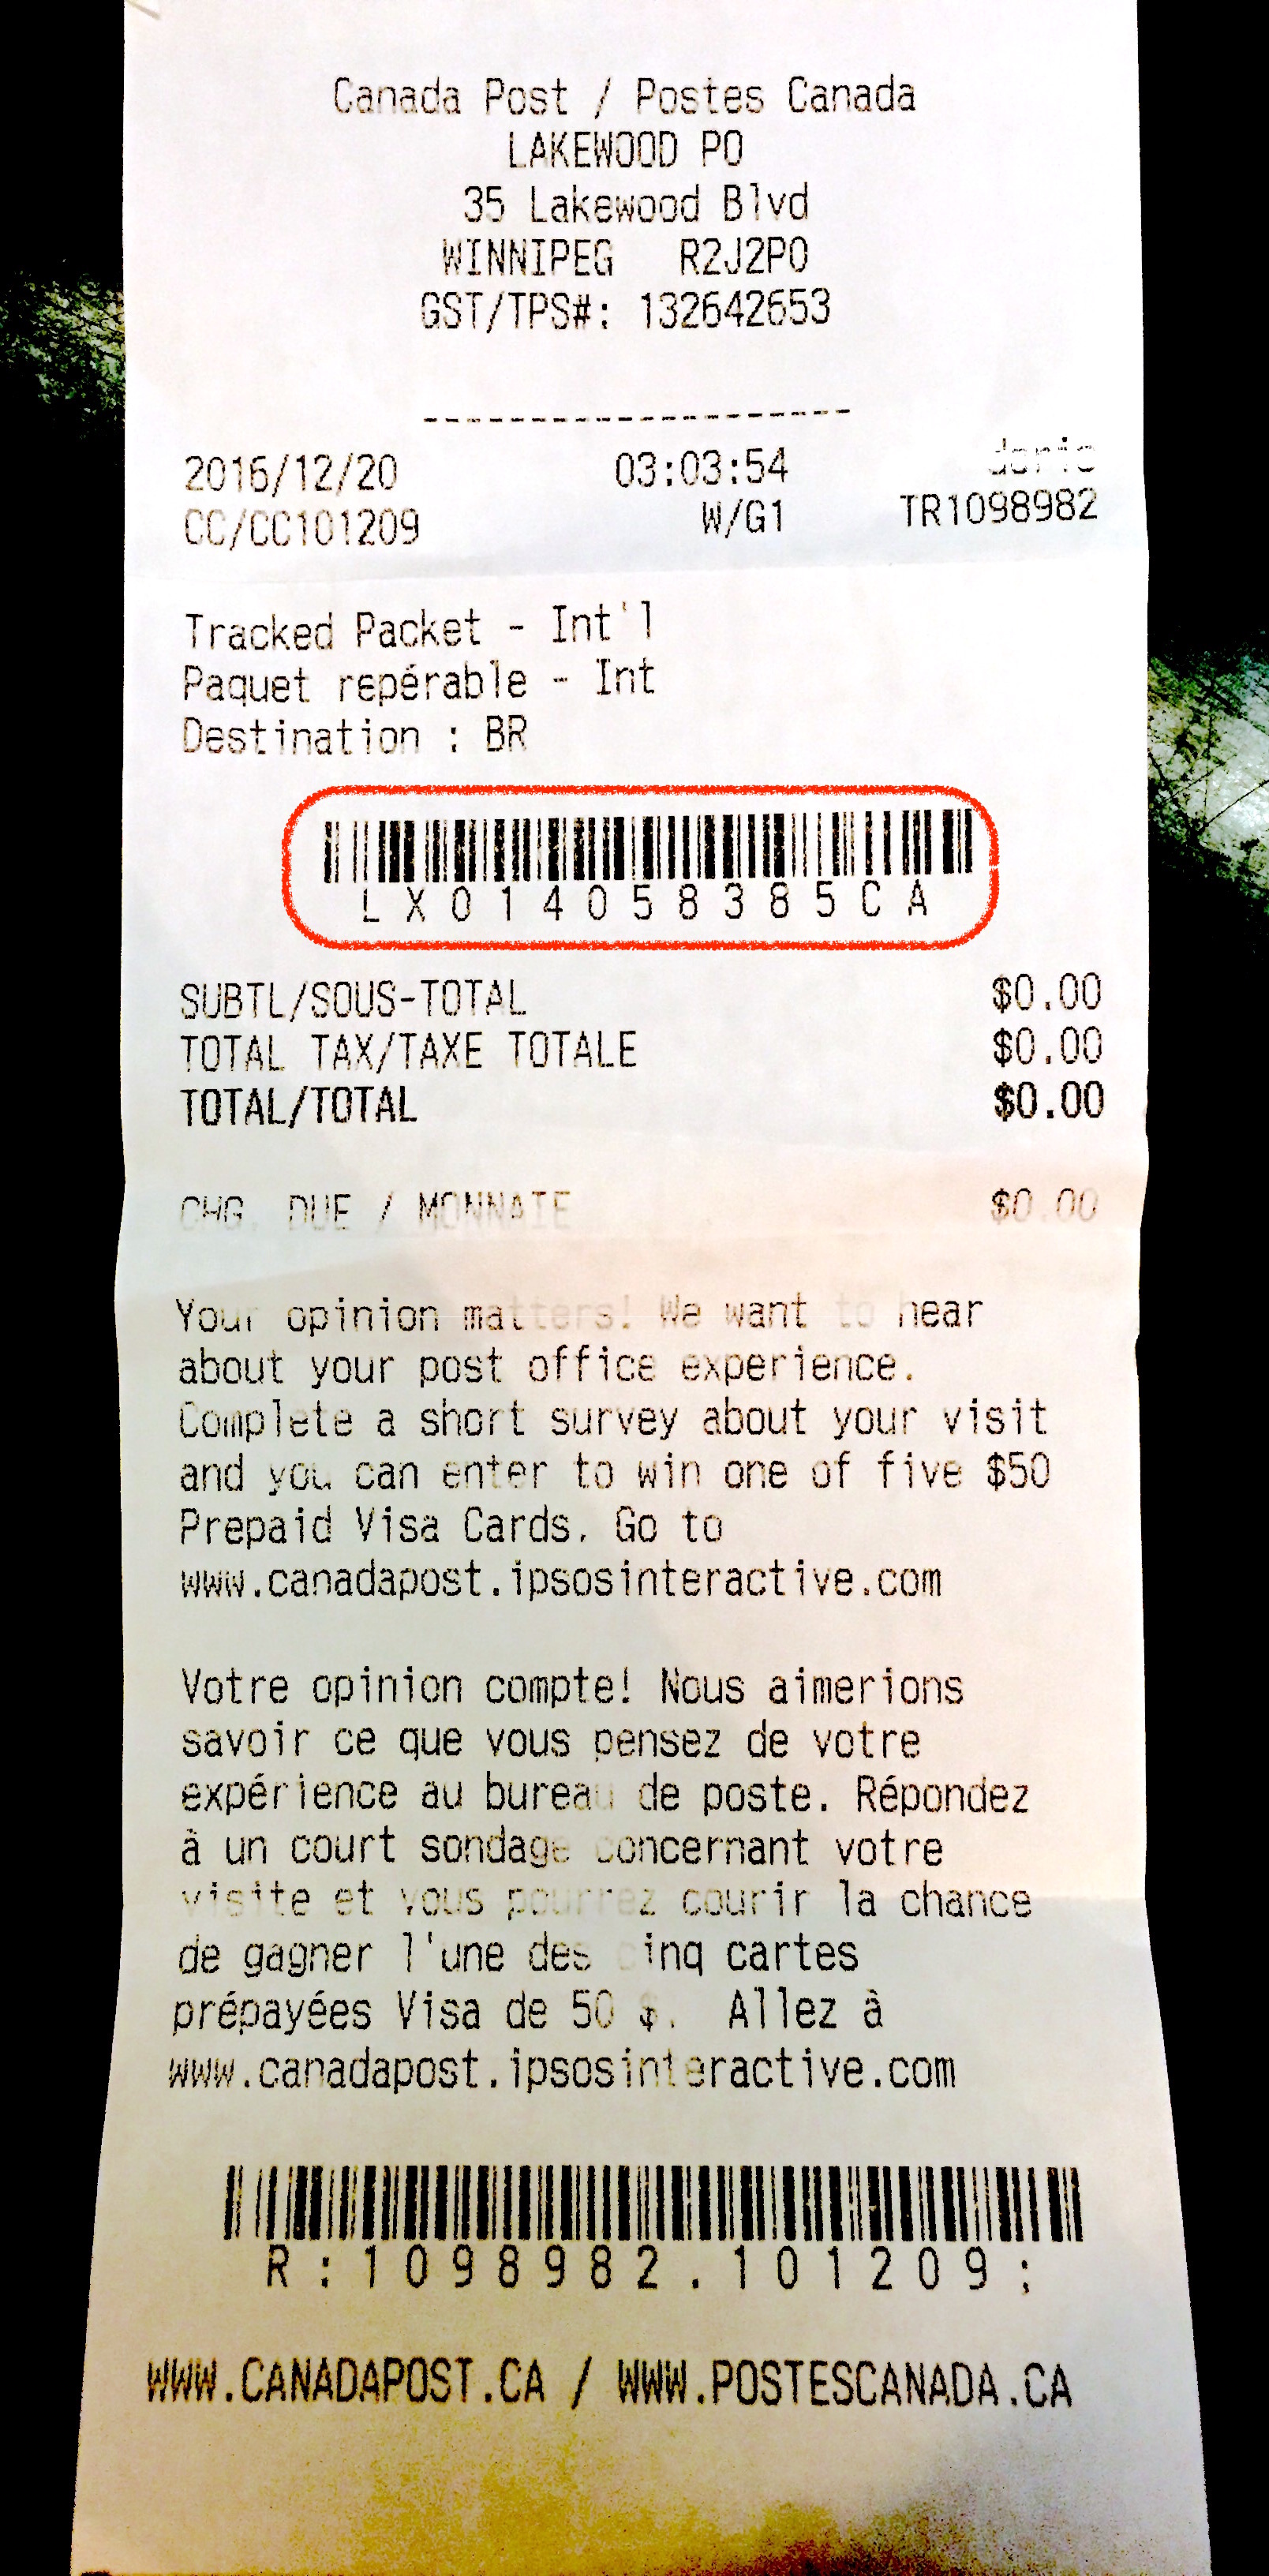 Acceptance Scan Receipt - Page 2 - The eBay Canada Community